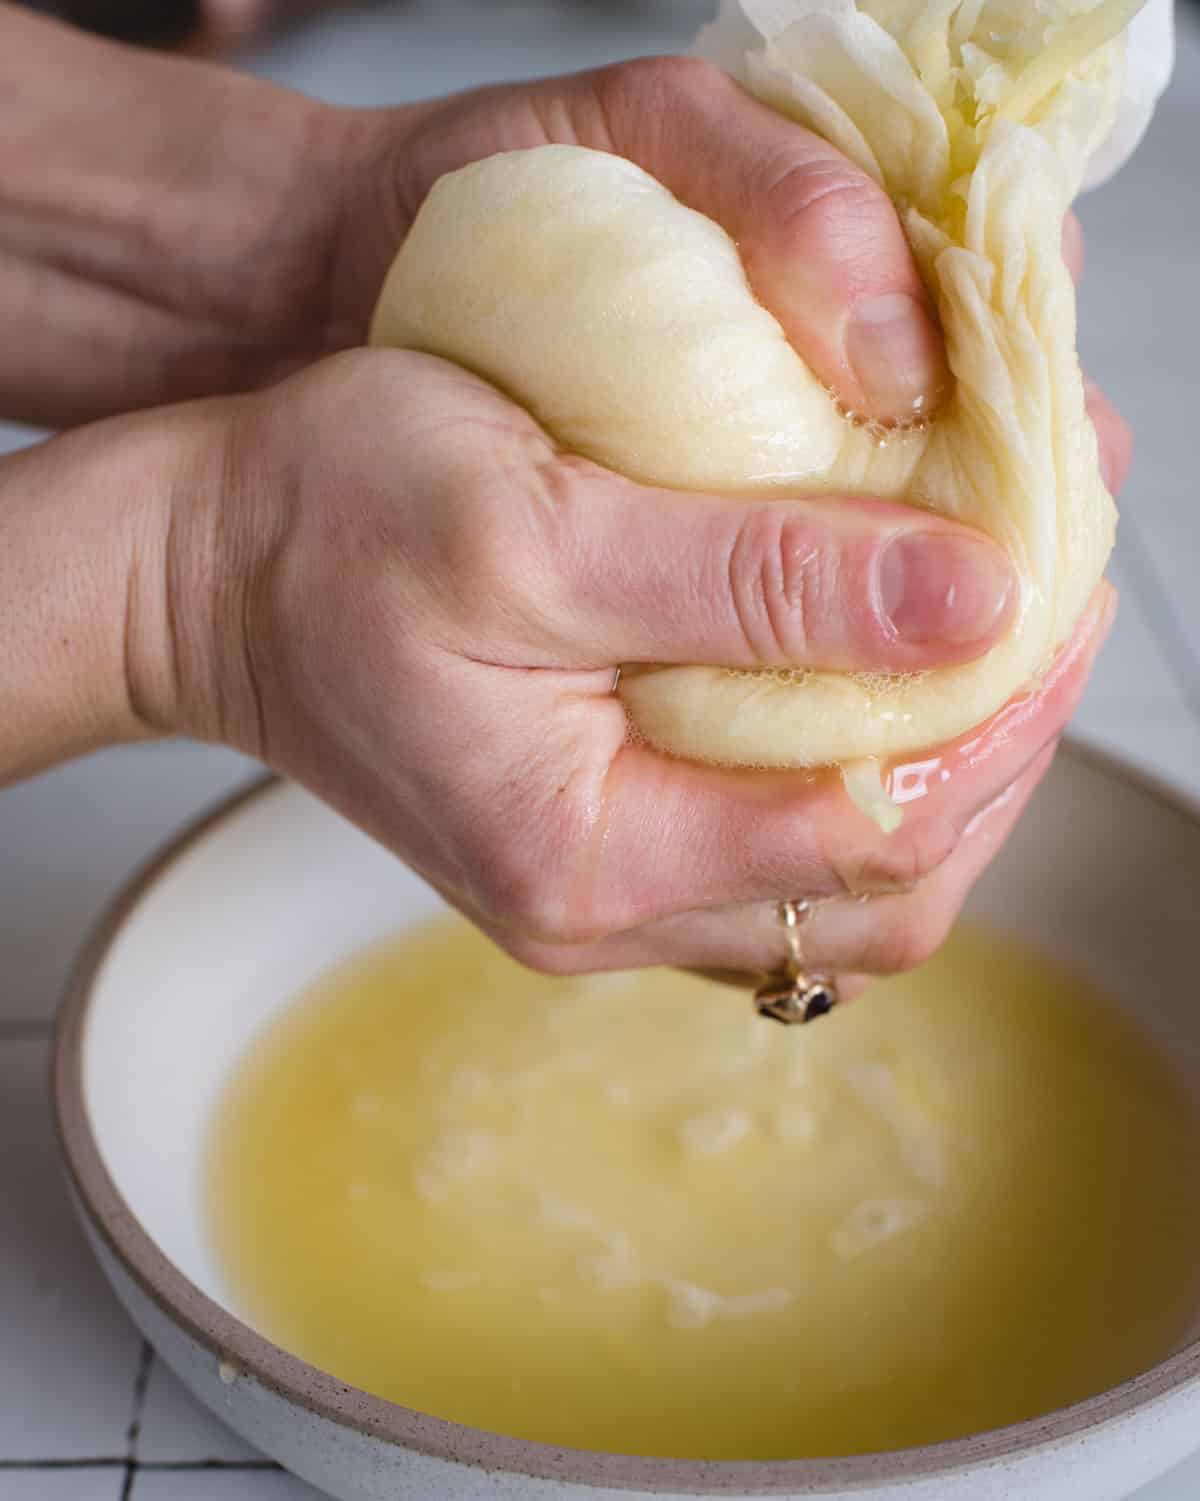 Hands squeezing the water out of shredded potato and onion